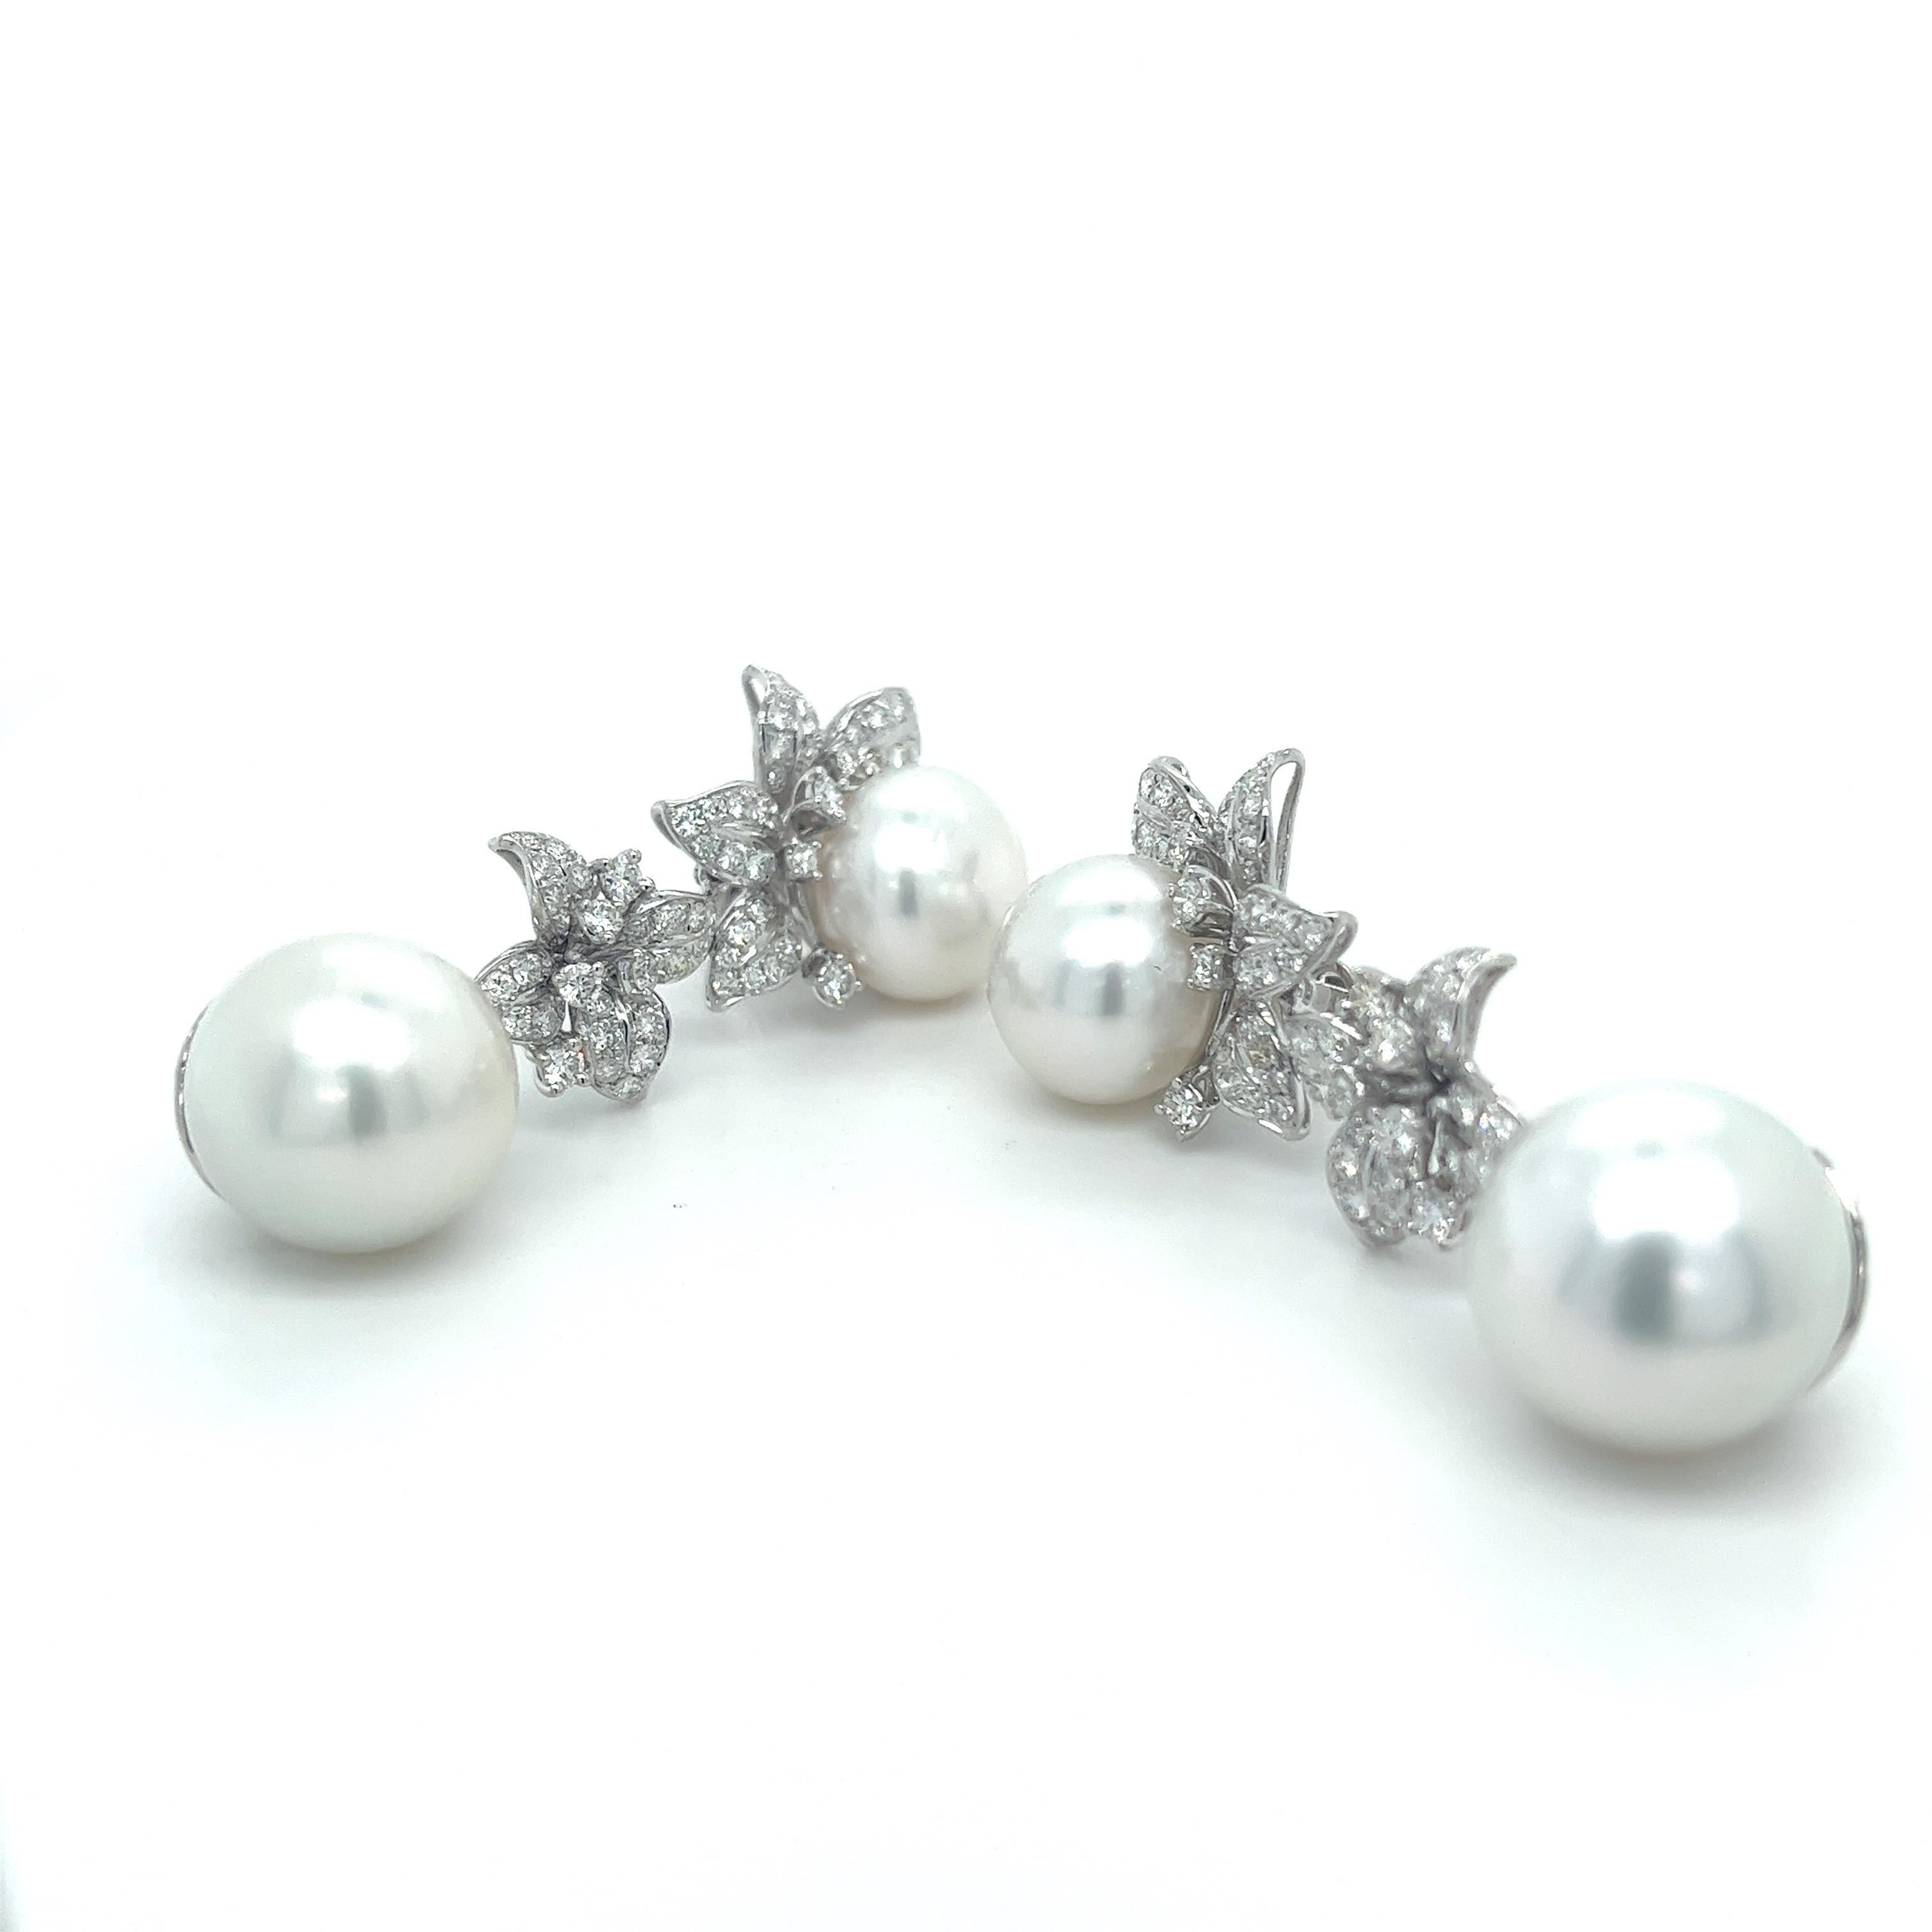 18K White Gold Pearl Earrings with Diamonds

2 White Pearls 15mm
2 White Pearls 13mm
144 Diamonds - 2.580 CT
18K White Gold - 11.540 GM

Indulge in sophistication with Althoff Jewelry 18K White Gold Pearl Earrings. Featuring two lustrous 15mm and